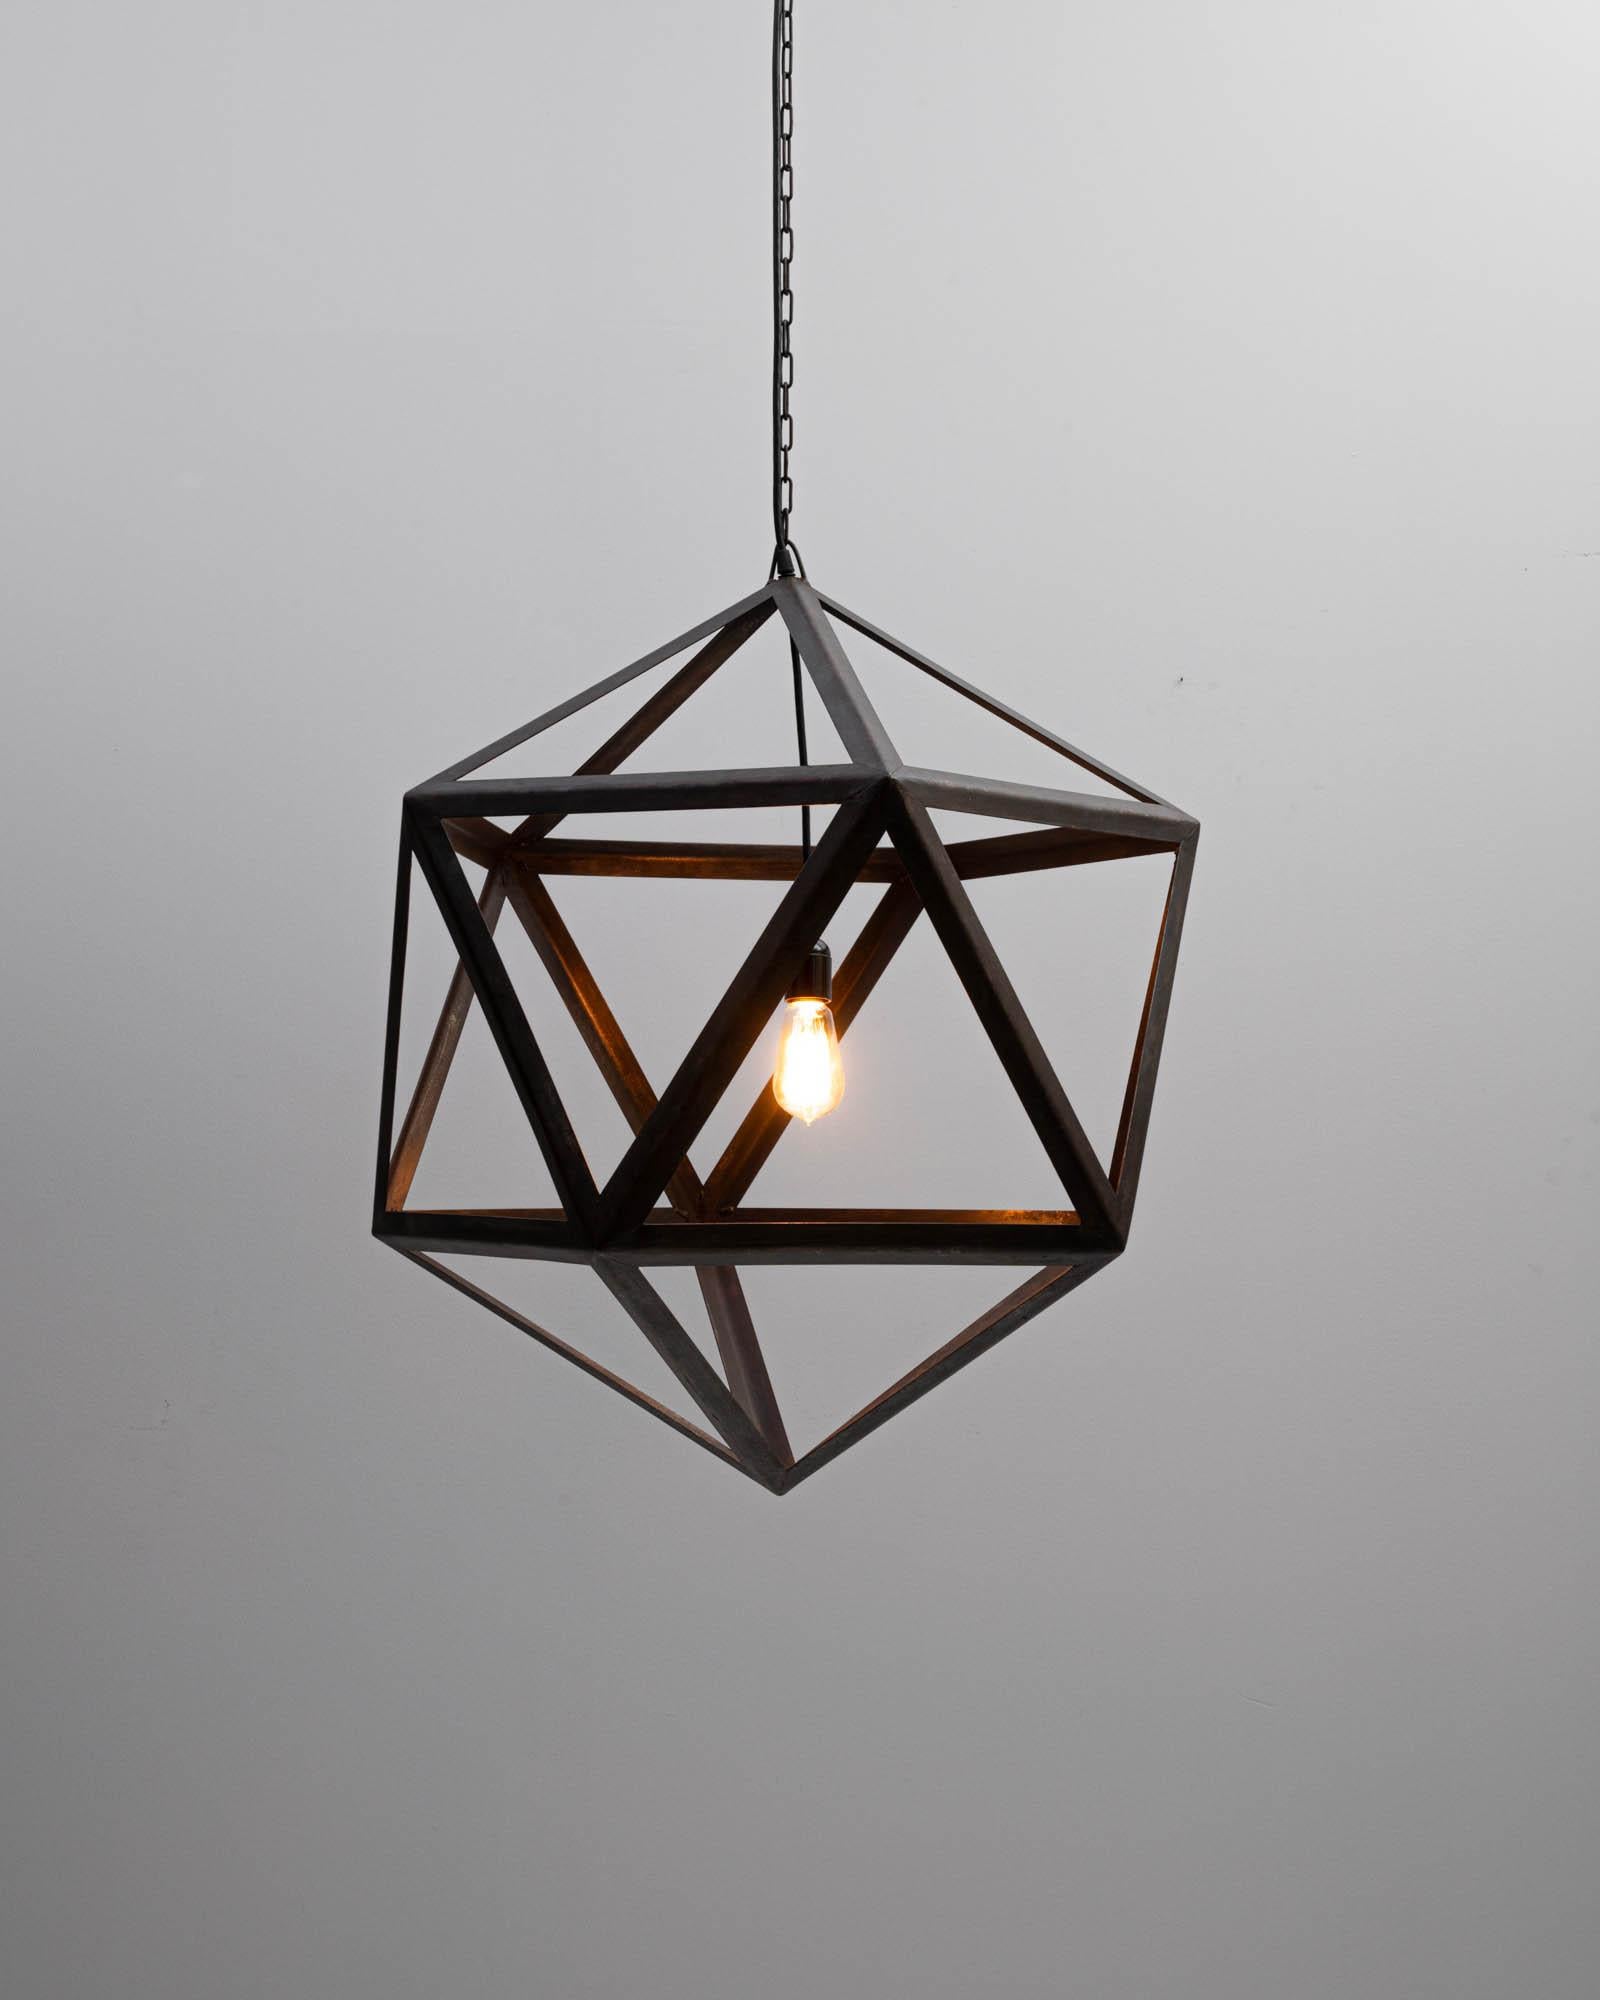 Contemporary Industrial Prototype Icosahedron Pendant Light For Sale